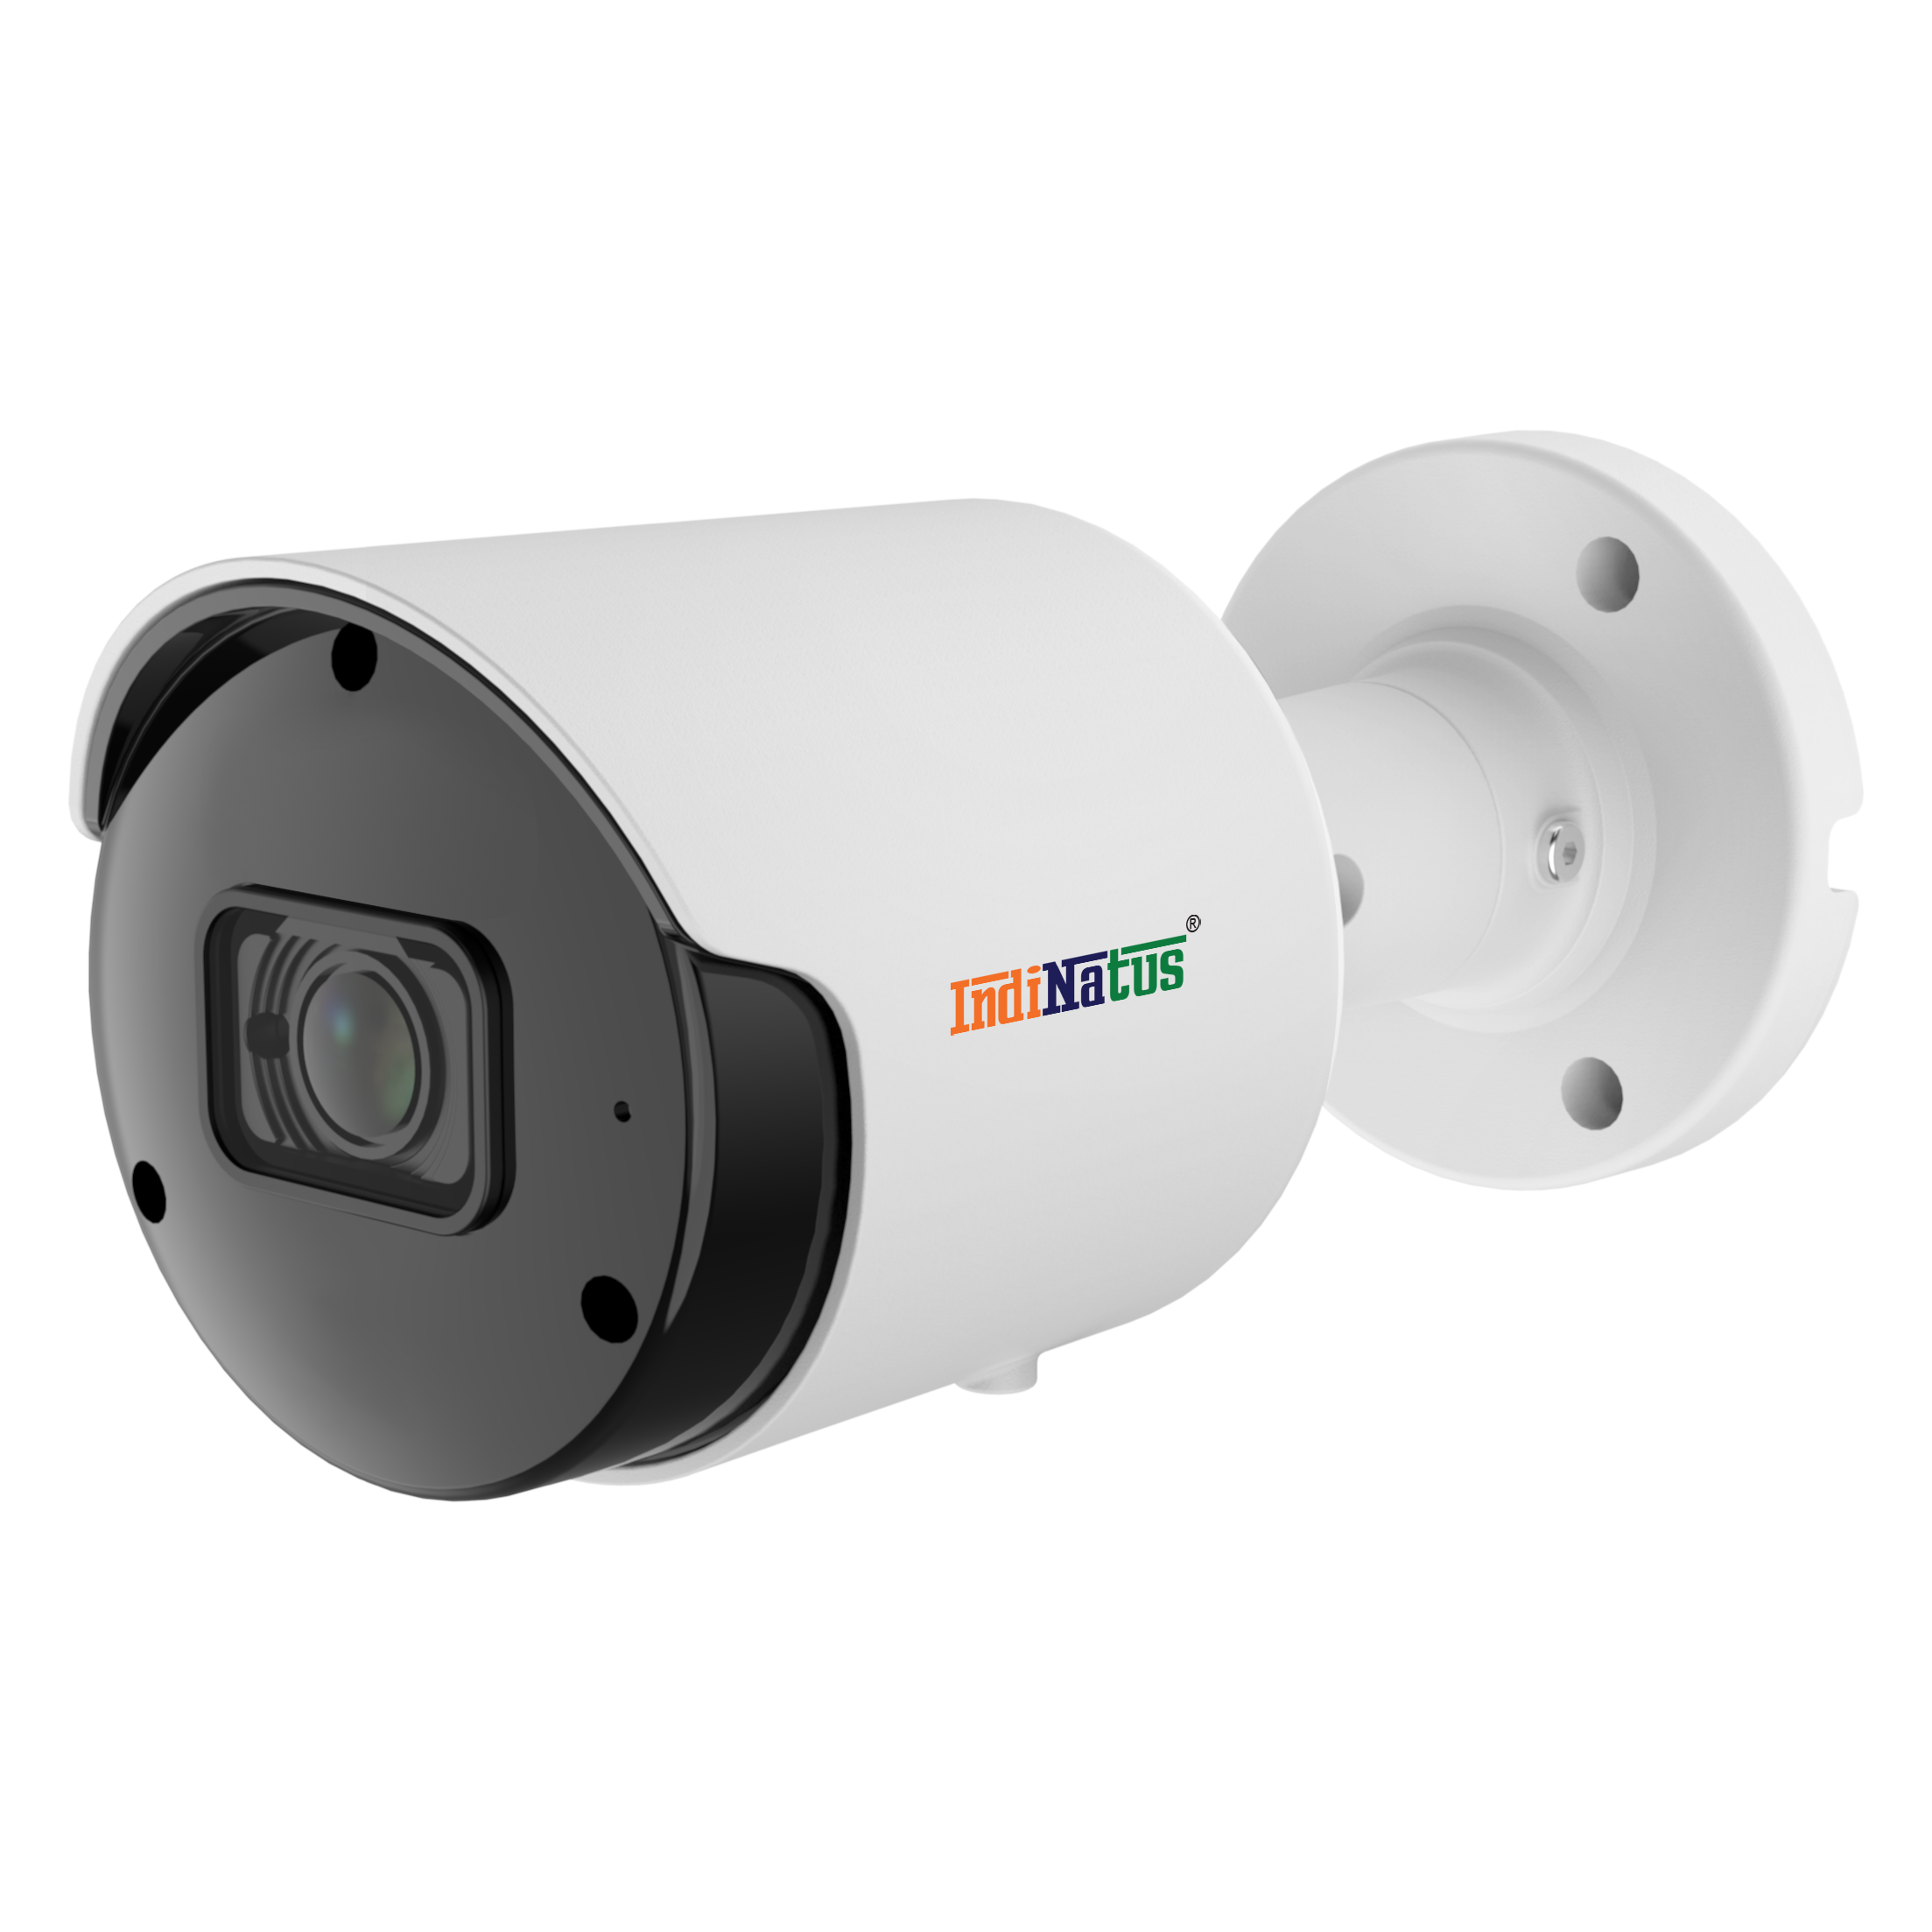  2-Megapixel IR & WDR, Outdoor Fixed IP Bullet Camera, IN-IPC2A22P-I5(M)SD,  IndiNatus® India Private Limited - India Ka Apna Brand, Indian CCTV  Brand,  Make In India CCTV camera, Make in india cctv camera brand available on gem portal, IP Network Camera, Indian brand CCTV Camera, Best OEM Of CCTV in India      